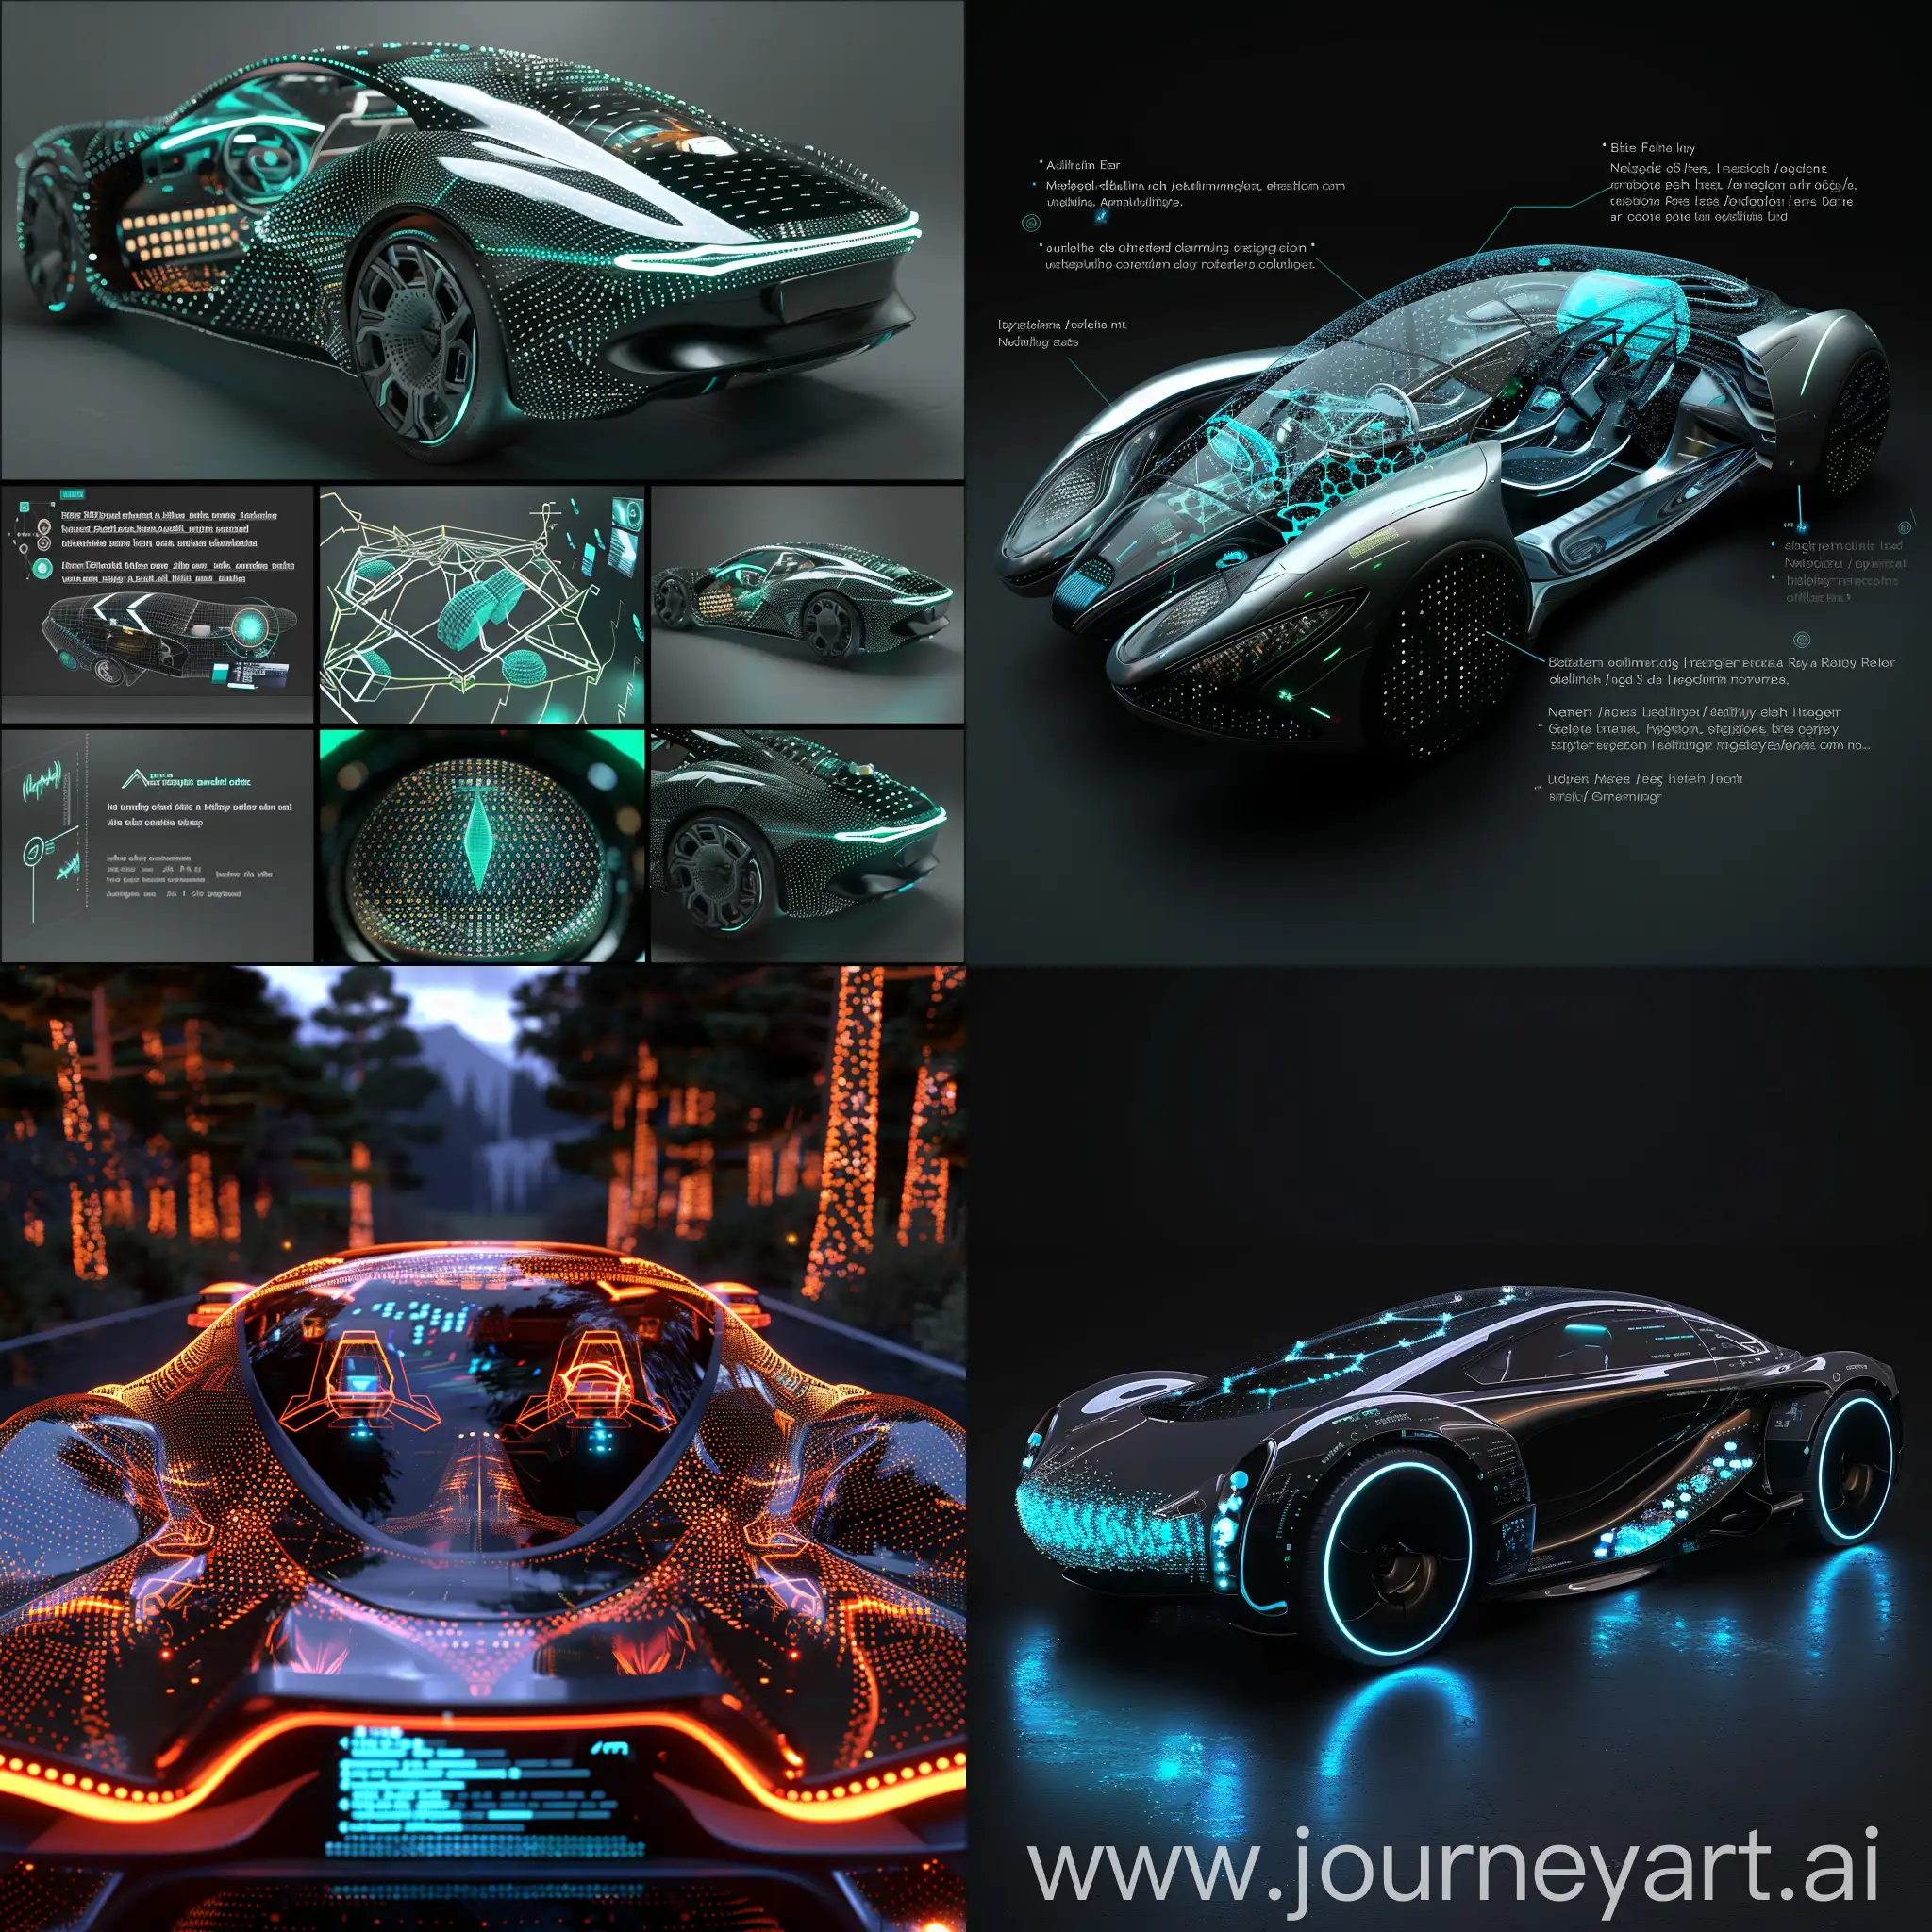 Futuristic car, in futuristic style, Organic Interface Integration, Bioluminescent Ambient Lighting, Nanotech Air Filtration System, Adaptive Biometric Seating, Augmented Reality Windshield Display, Neural Network-based Autopilot, Biomechanical Energy Harvesting, Synthetic Biofuel Cells, Quantum Encryption Cybersecurity, Hyperconnected Neural Network Integration, Bioluminescent Exterior Lighting, Nanotech Self-Healing Body Panels, Organic Solar Panel Integration, Augmented Reality Exterior Display, Biomechanical Morphing Aerodynamics, Bioengineered Air Filtration Grille, Cybernetic Communication Antennae, Nanoparticle Coating for Self-Cleaning, Holographic Projection Windshield, Biometric Recognition Vehicle Access, unreal engine 5 --stylize 1000